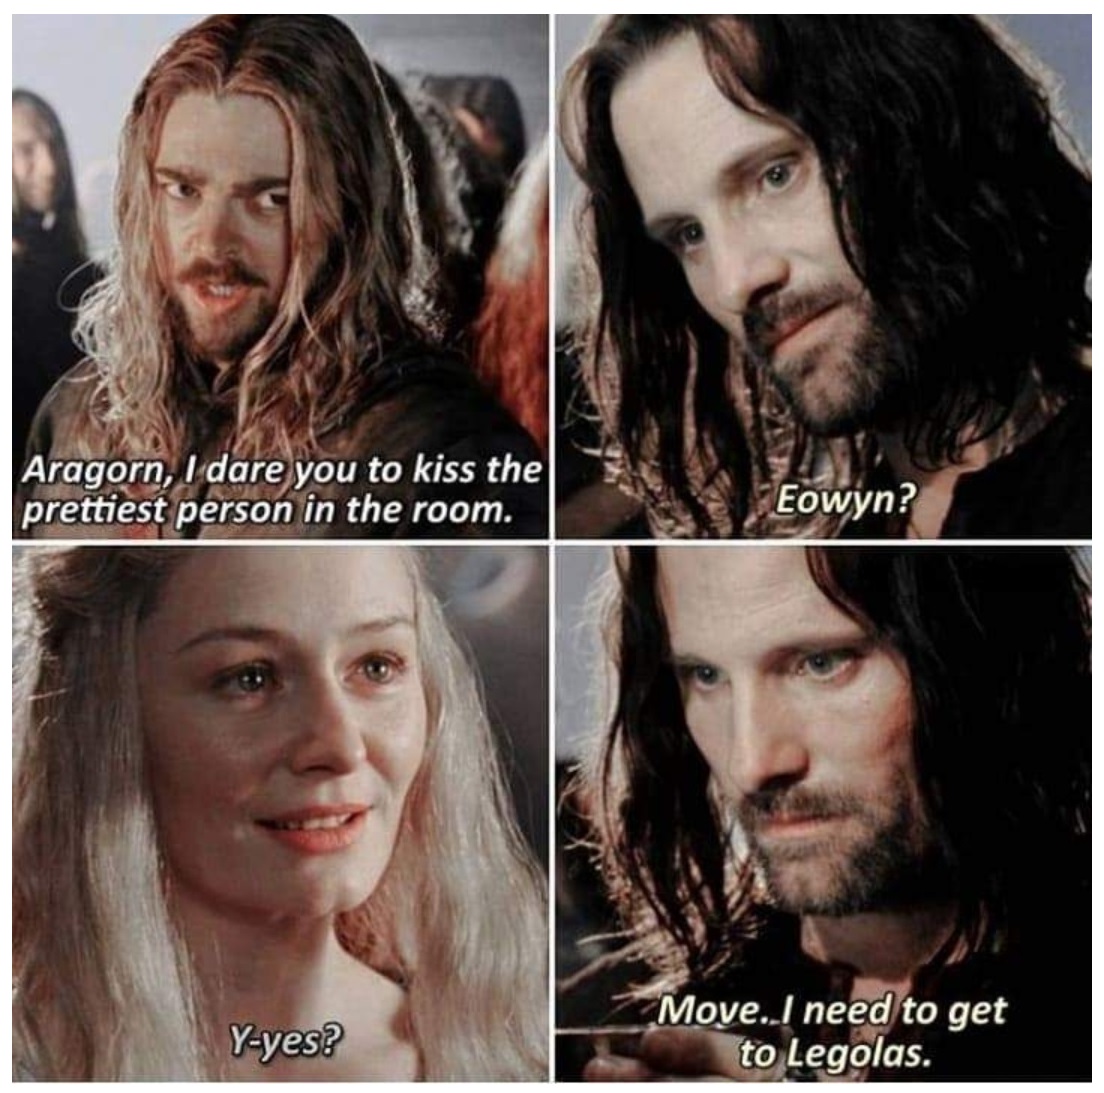 Aragorn, I dare you to kiss the prettiest person in the room. Eowyn? Yyes? Move..I need to get to Legolas.